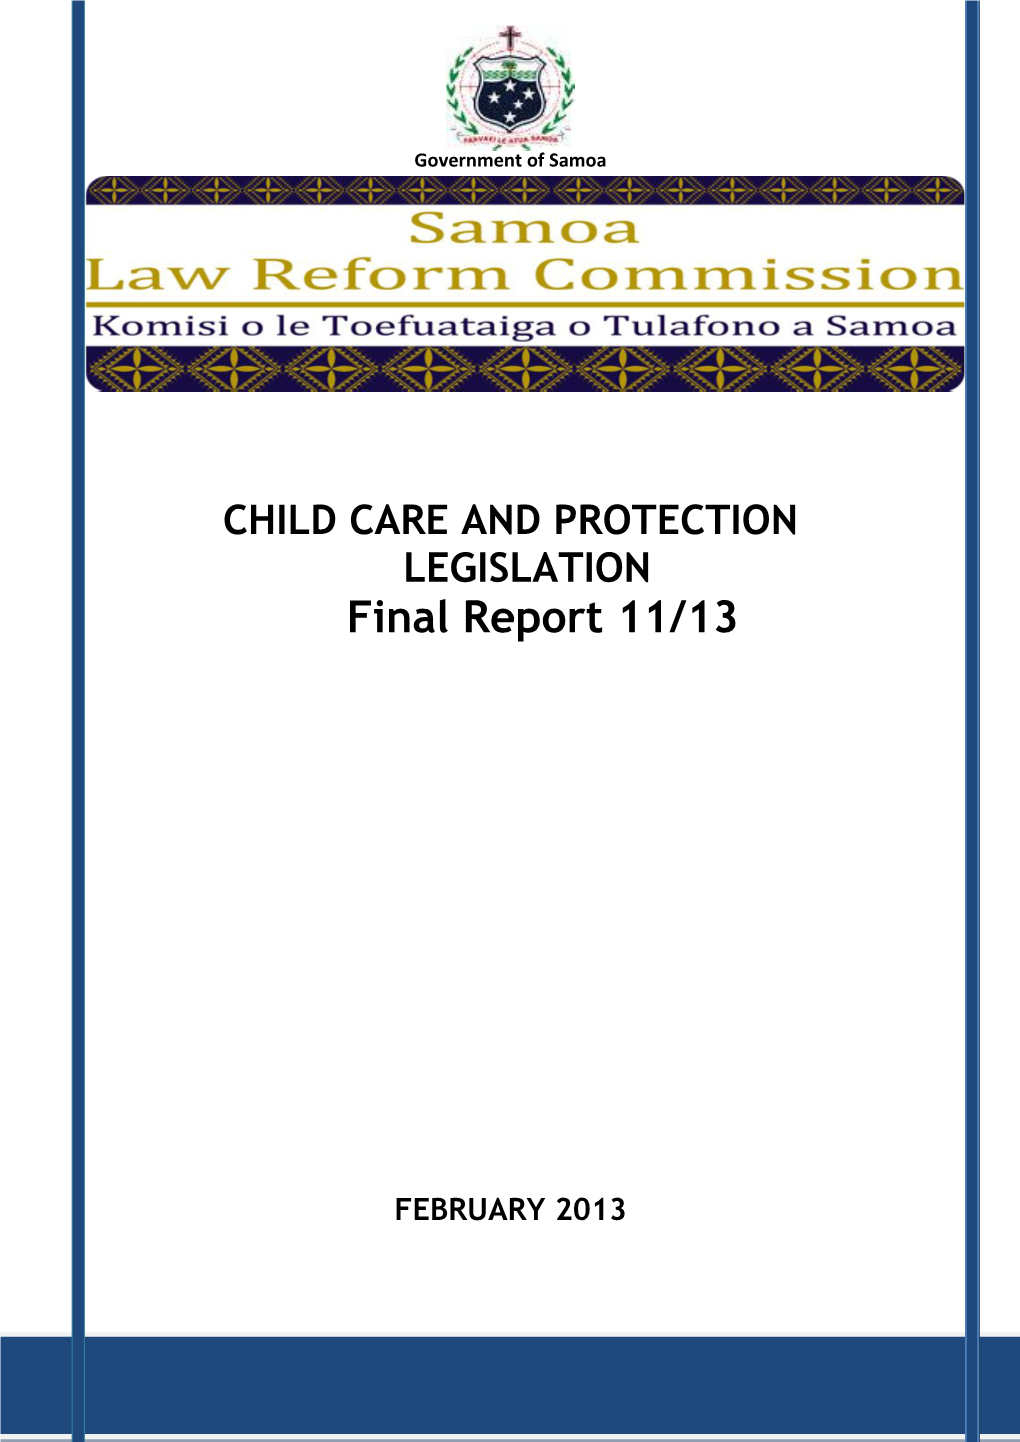 CHILD CARE and PROTECTION LEGISLATION Final Report 11/13